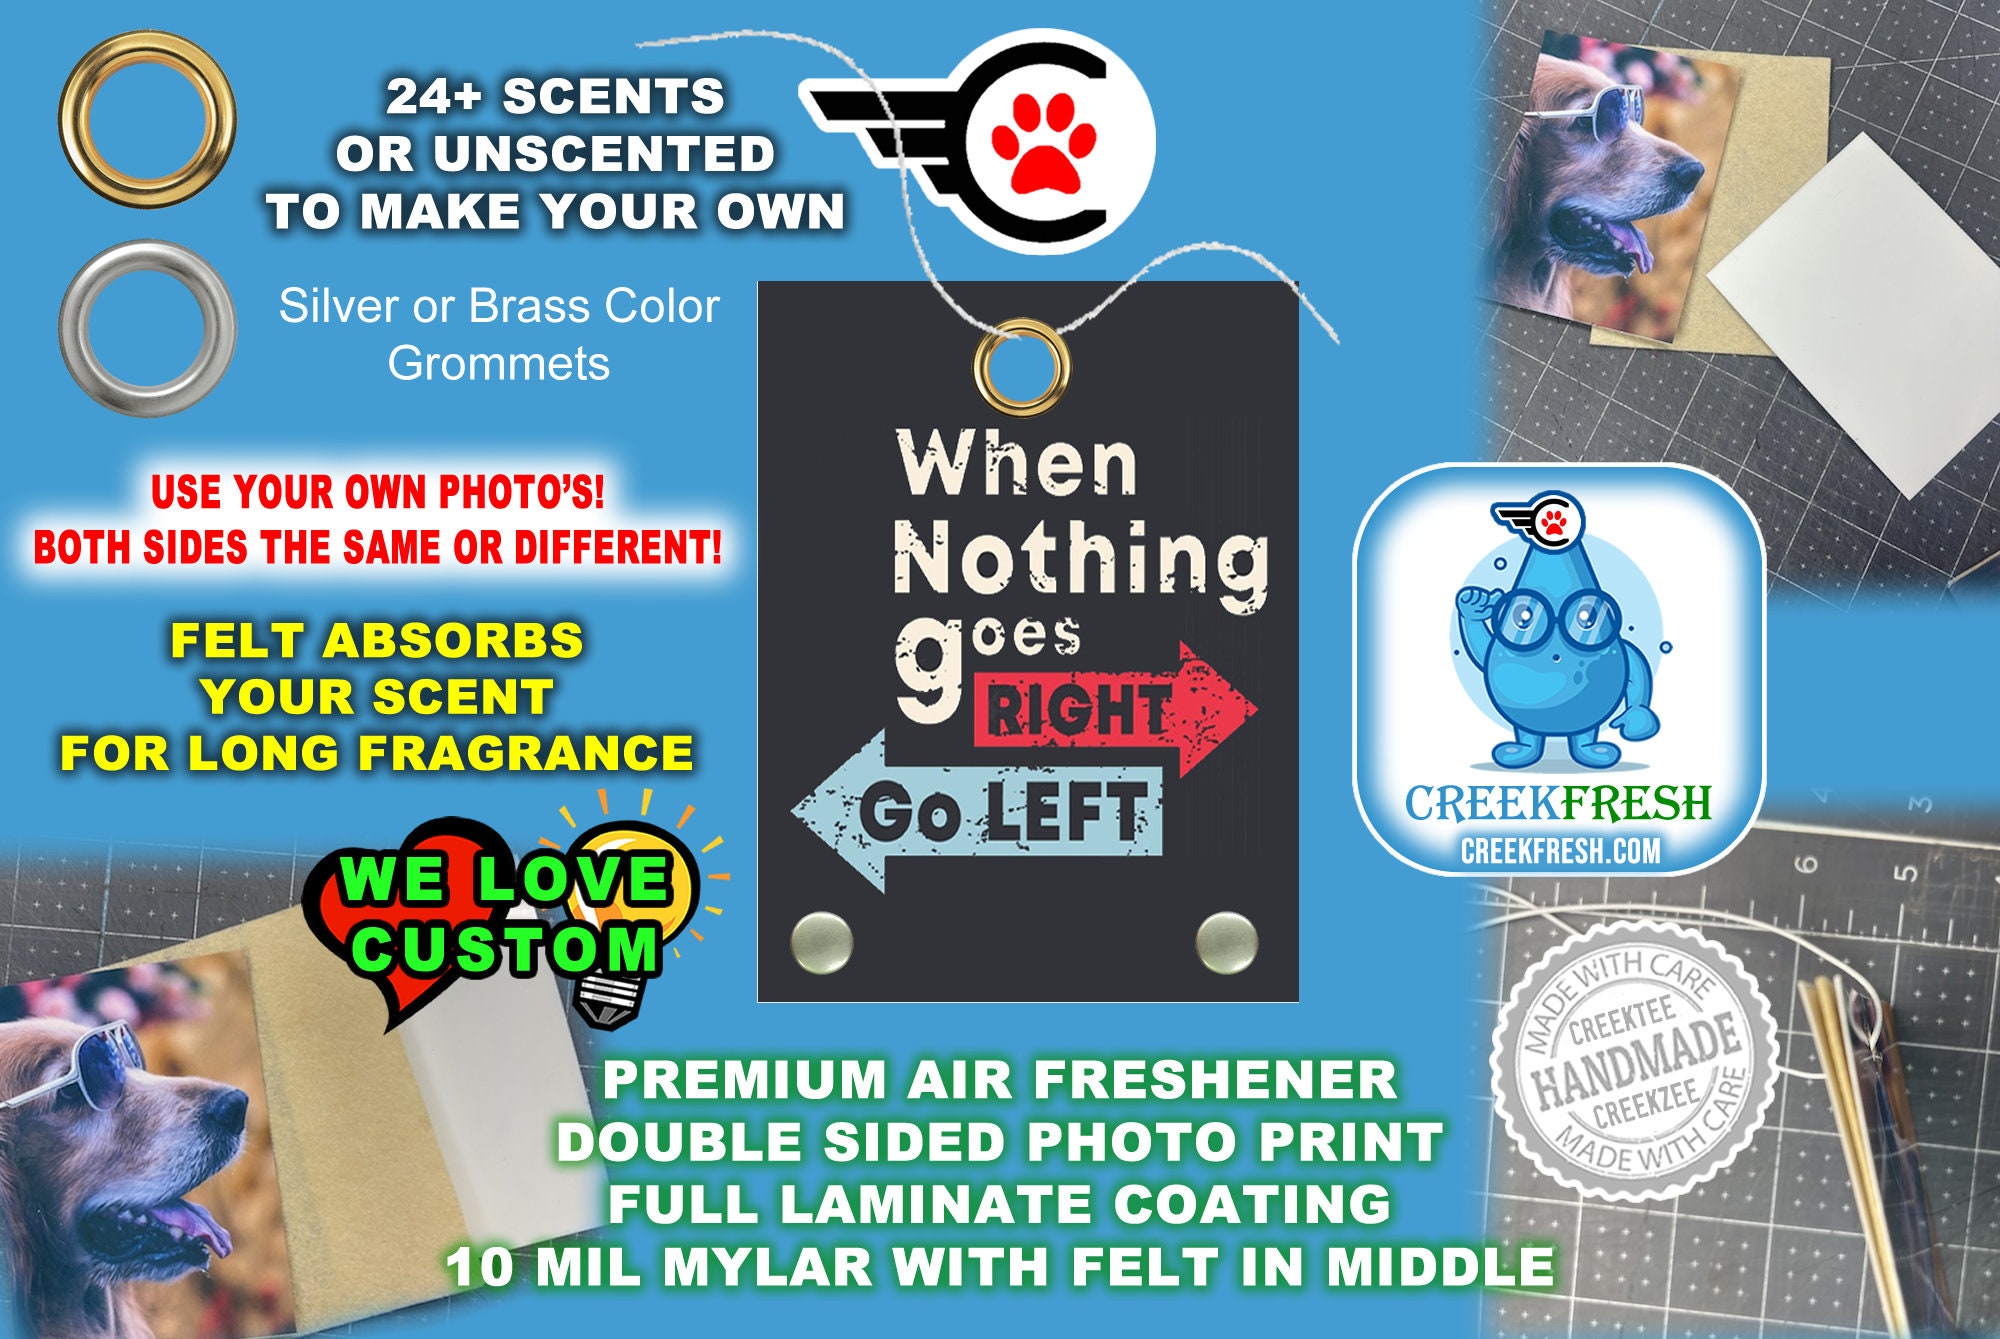 When Nothing Goes Right Go Left - Premium Car Air Freshener Color Print +Felt middle fragrance absorption. Scent or Non-Scent. Both Sides.